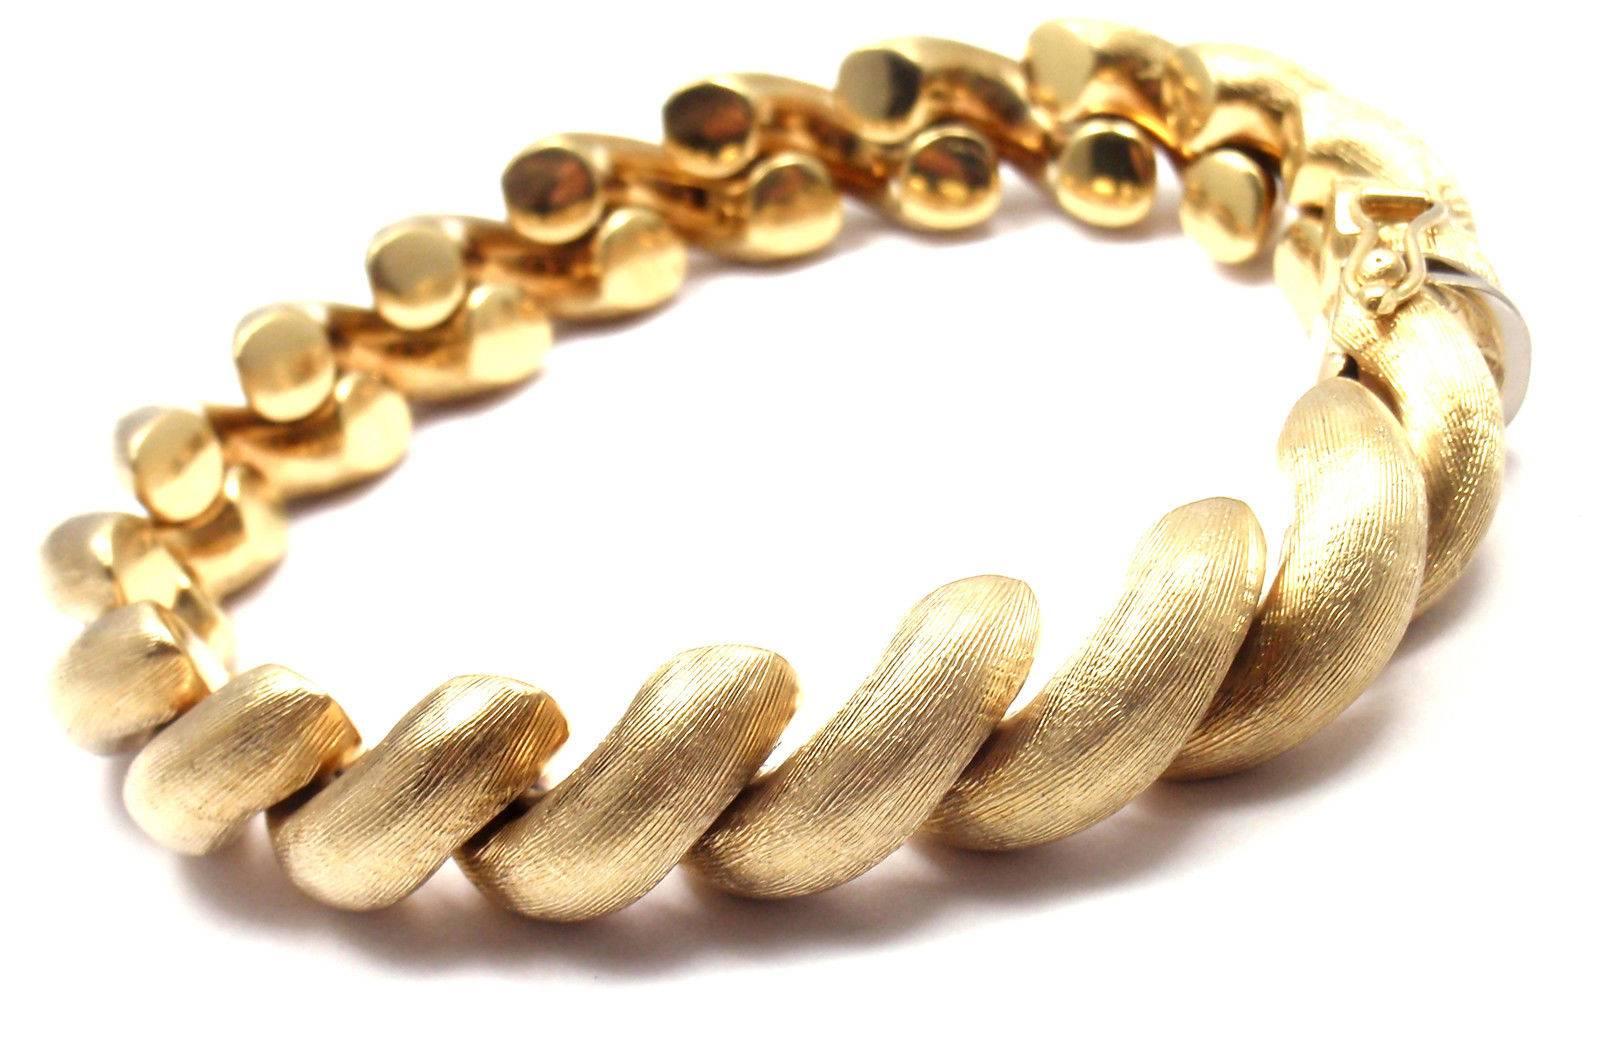 18k Yellow Gold Estate San Marco Macaroni Link Chain Bracelet.

Details: 
Length: 7 1/4"
Width: 11mm
Weight: 42.5 grams
Stamped Hallmarks: 750 Star

*Free Shipping within the United States* 
YOUR PRICE: $3,000
T1317mete